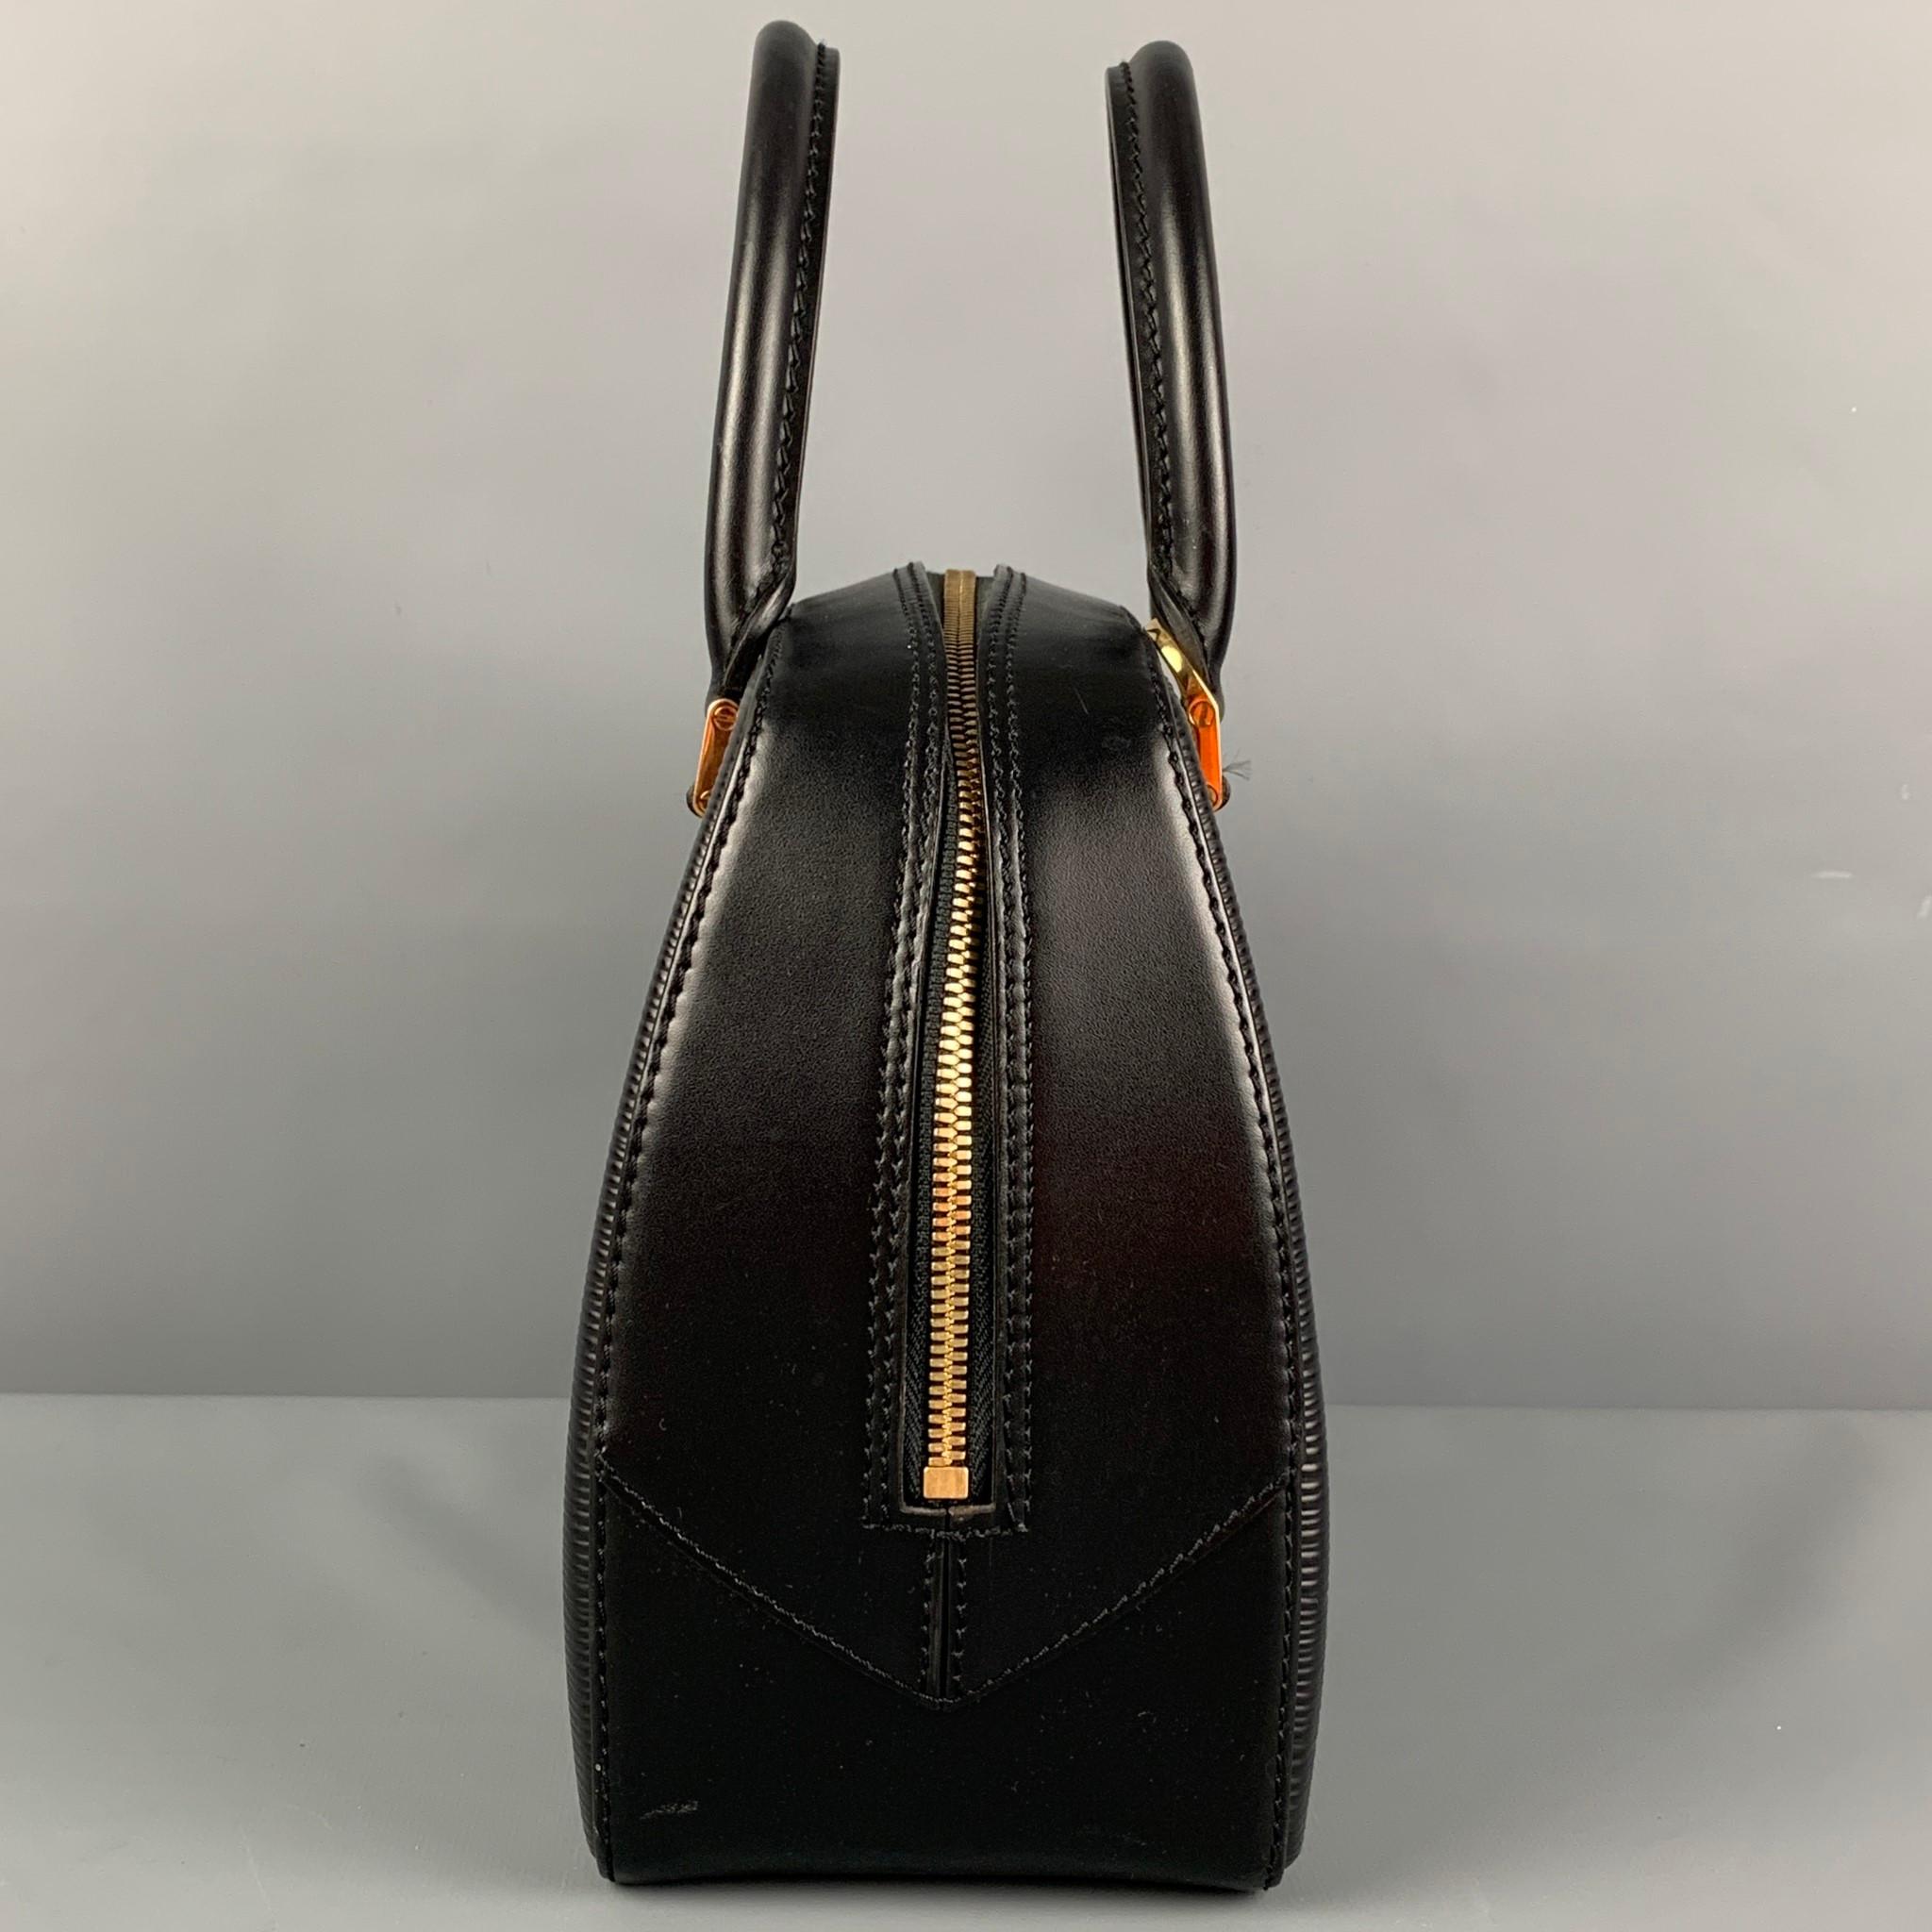 LOUIS VUITTON 'Pont Neuf PM' handbag comes in a epi leather featuring to handles, gold tone hardware, front logo detail, and a top zipper closure. Made in France.

Very Good Pre-Owned Condition.
Marked: TH0030

Measurements:

Length: 10 in.
Width: